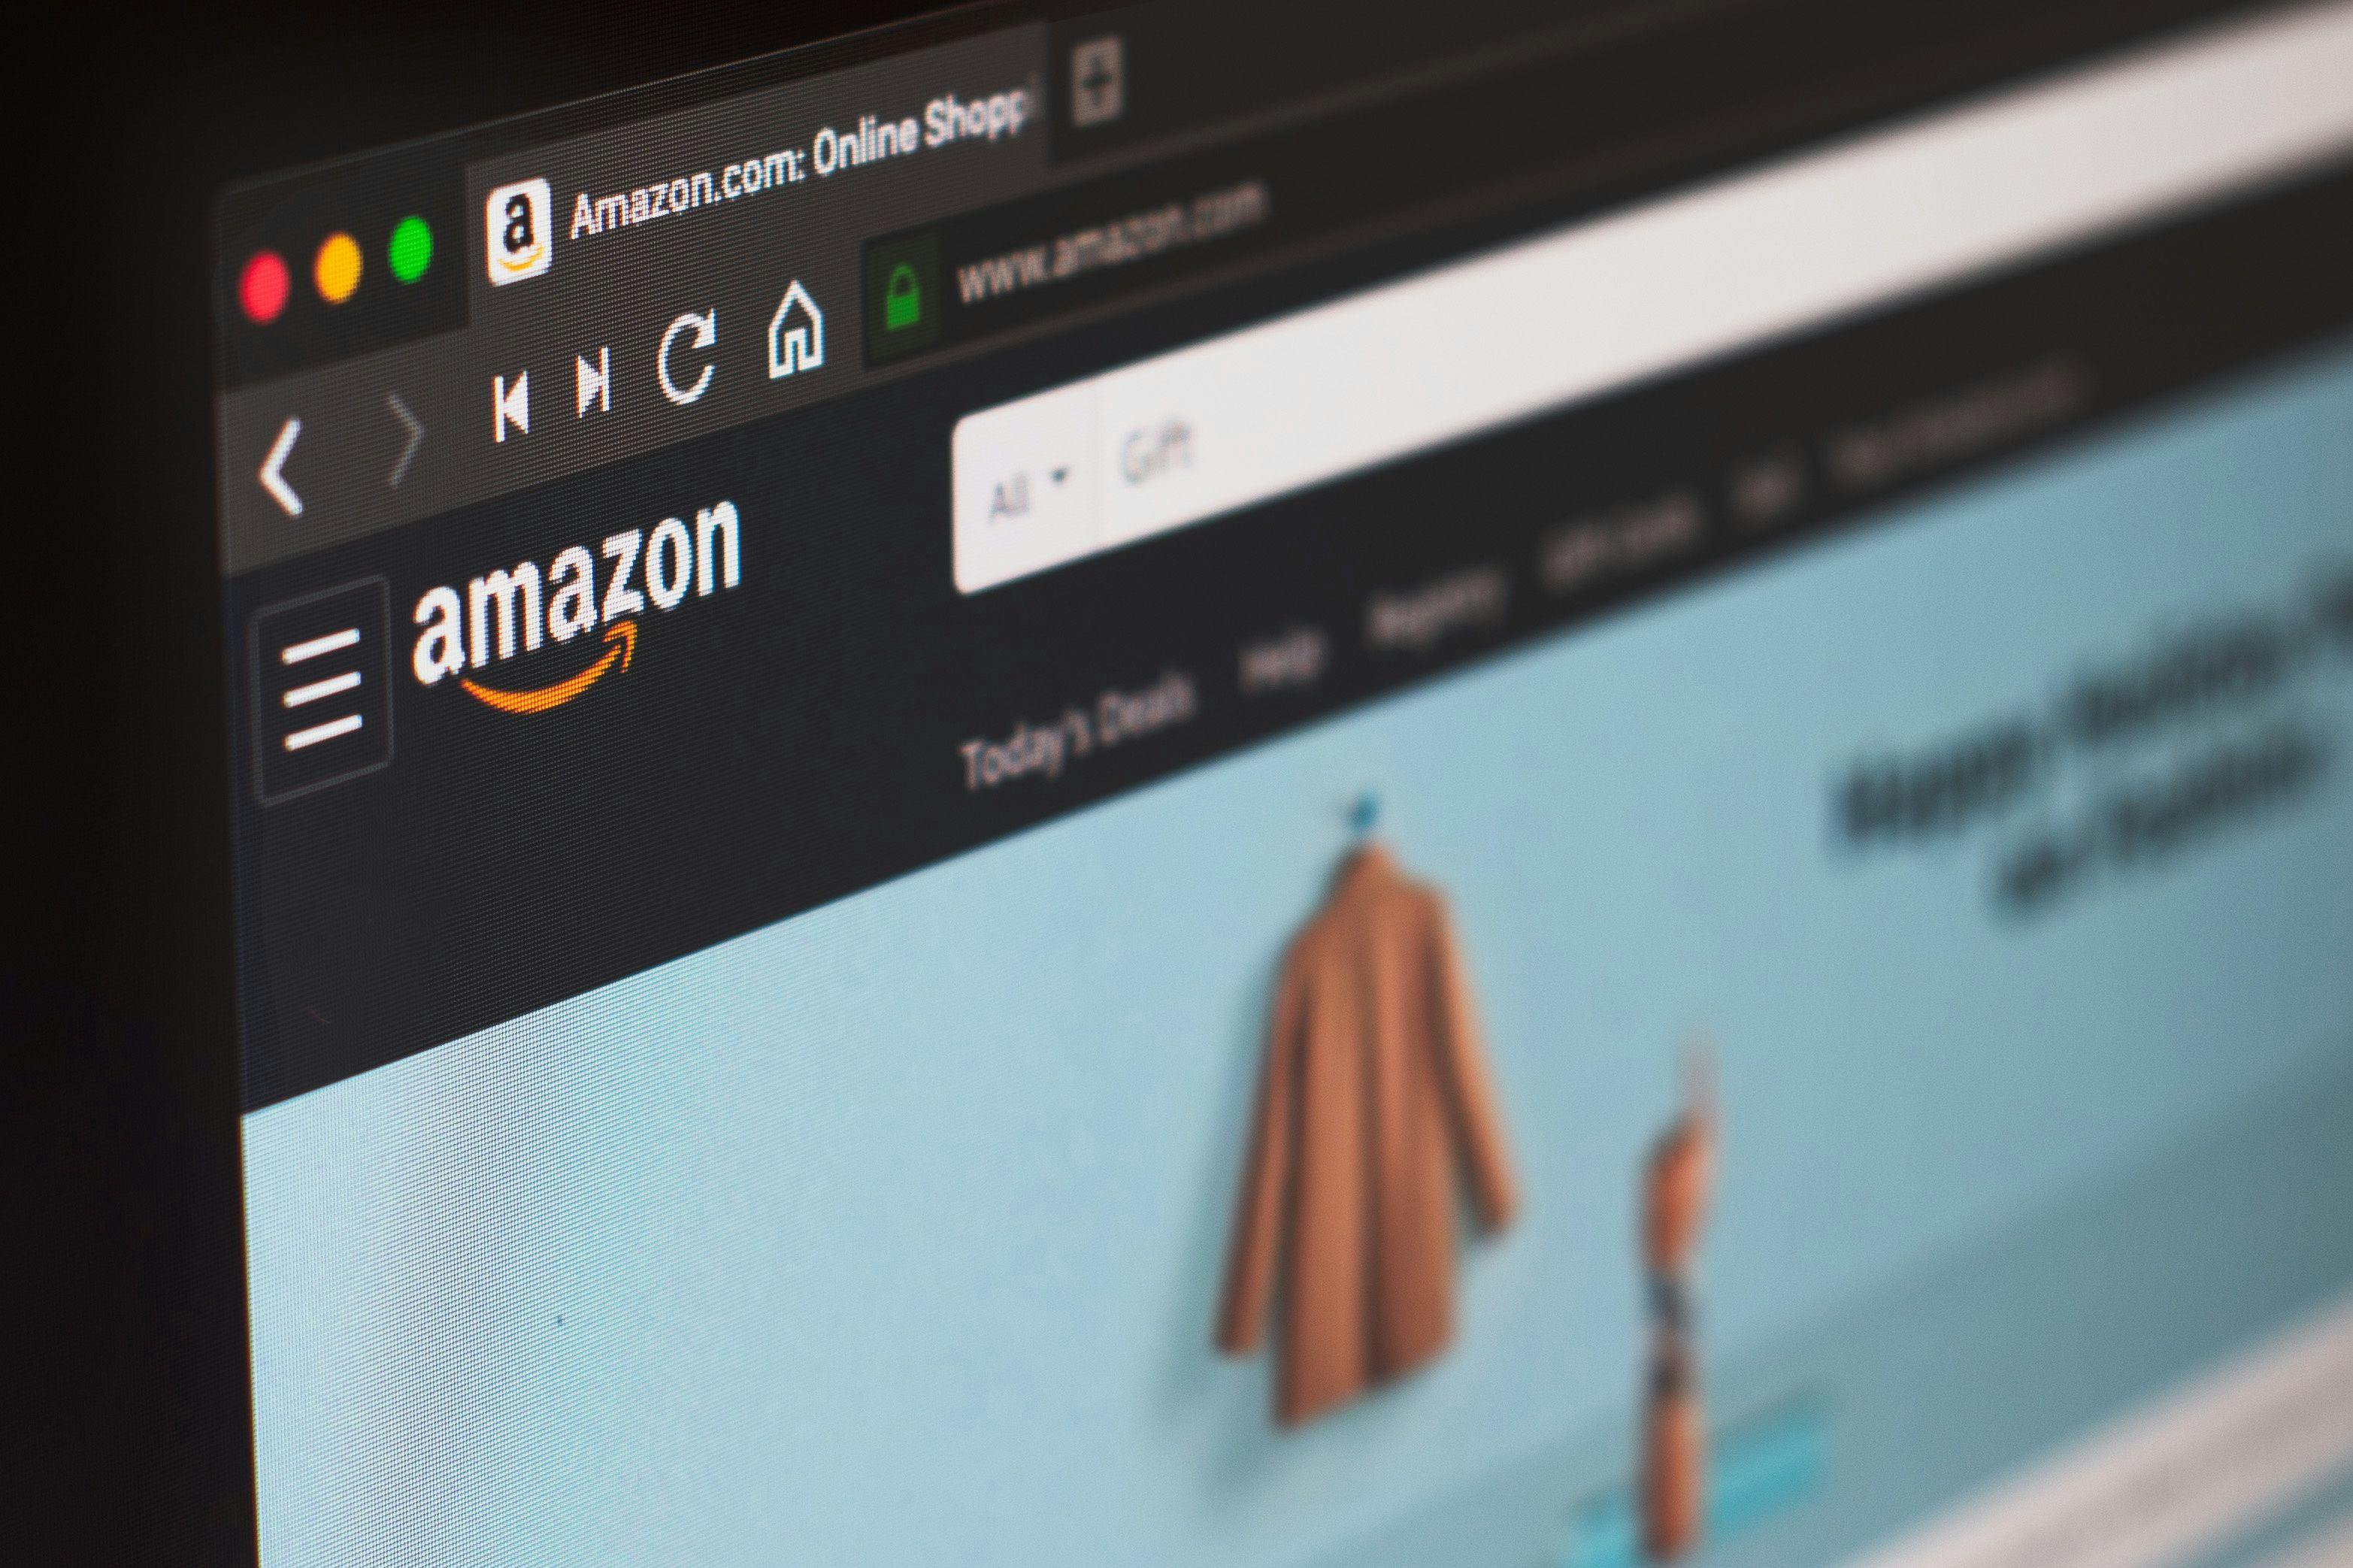 Amazon Clinic to offer online primary care services in 32 states